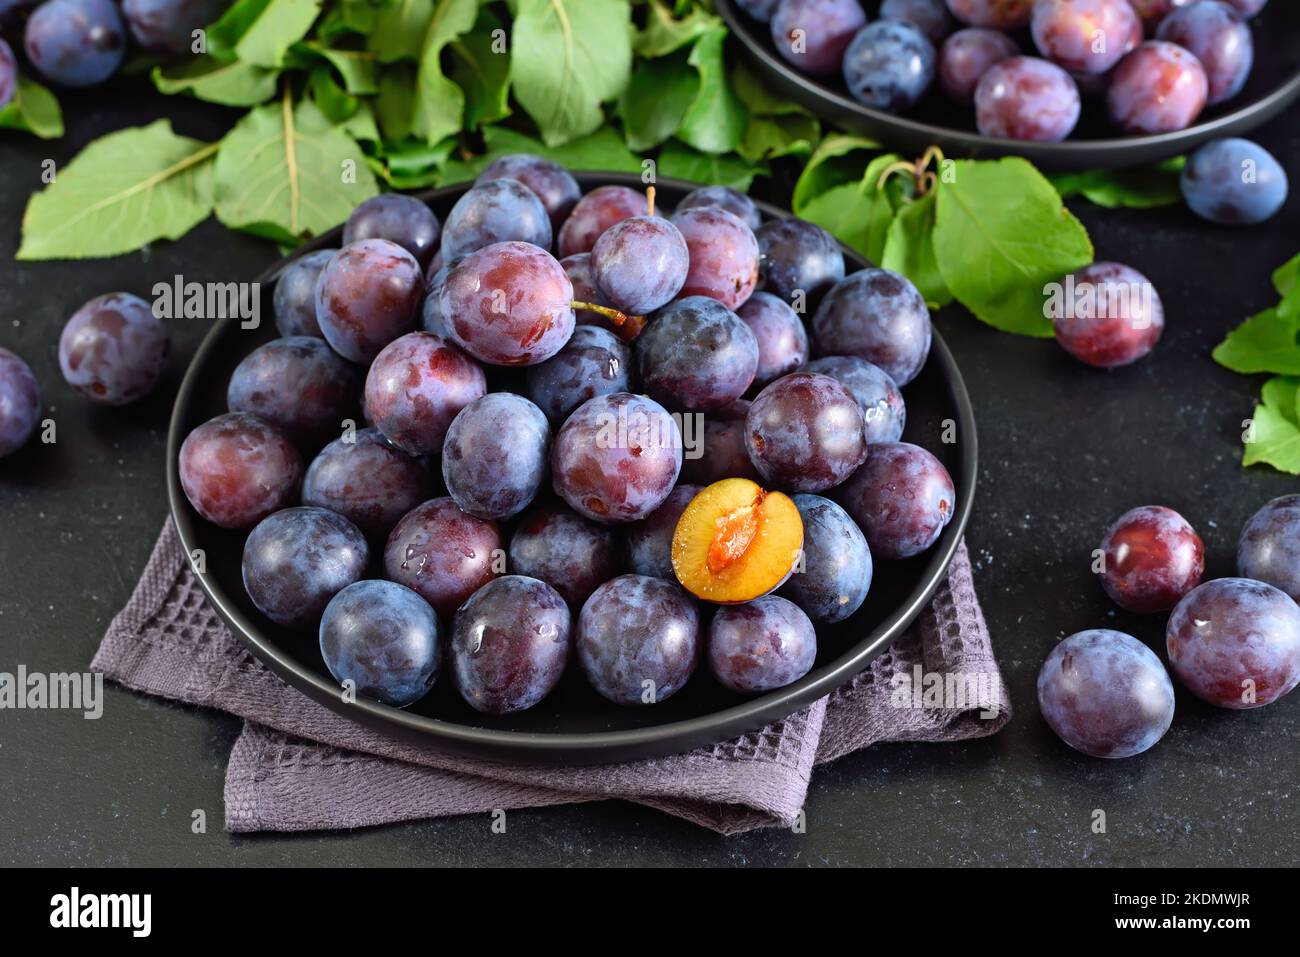 Fresh plums on plate over dark stone background Stock Photo